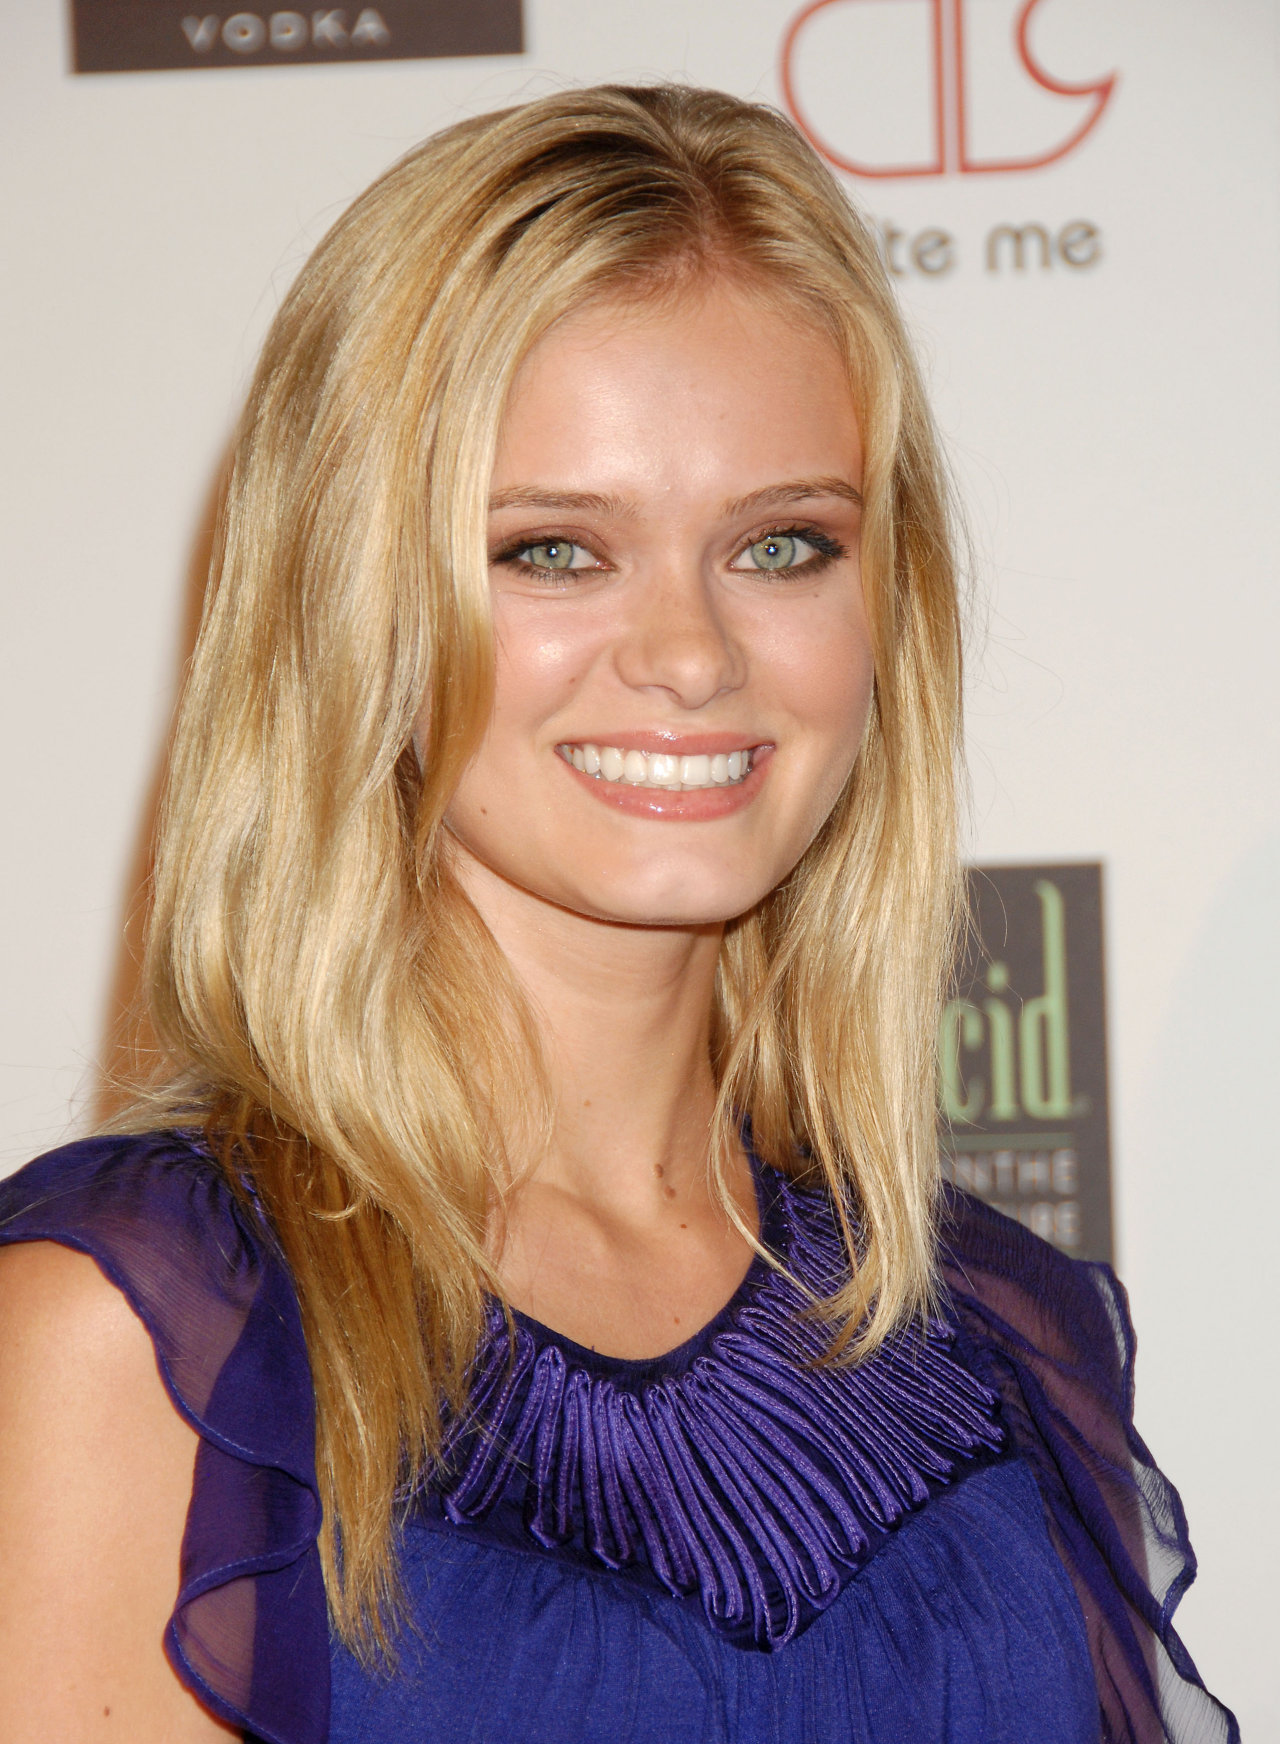 Sara Paxton leaked wallpapers